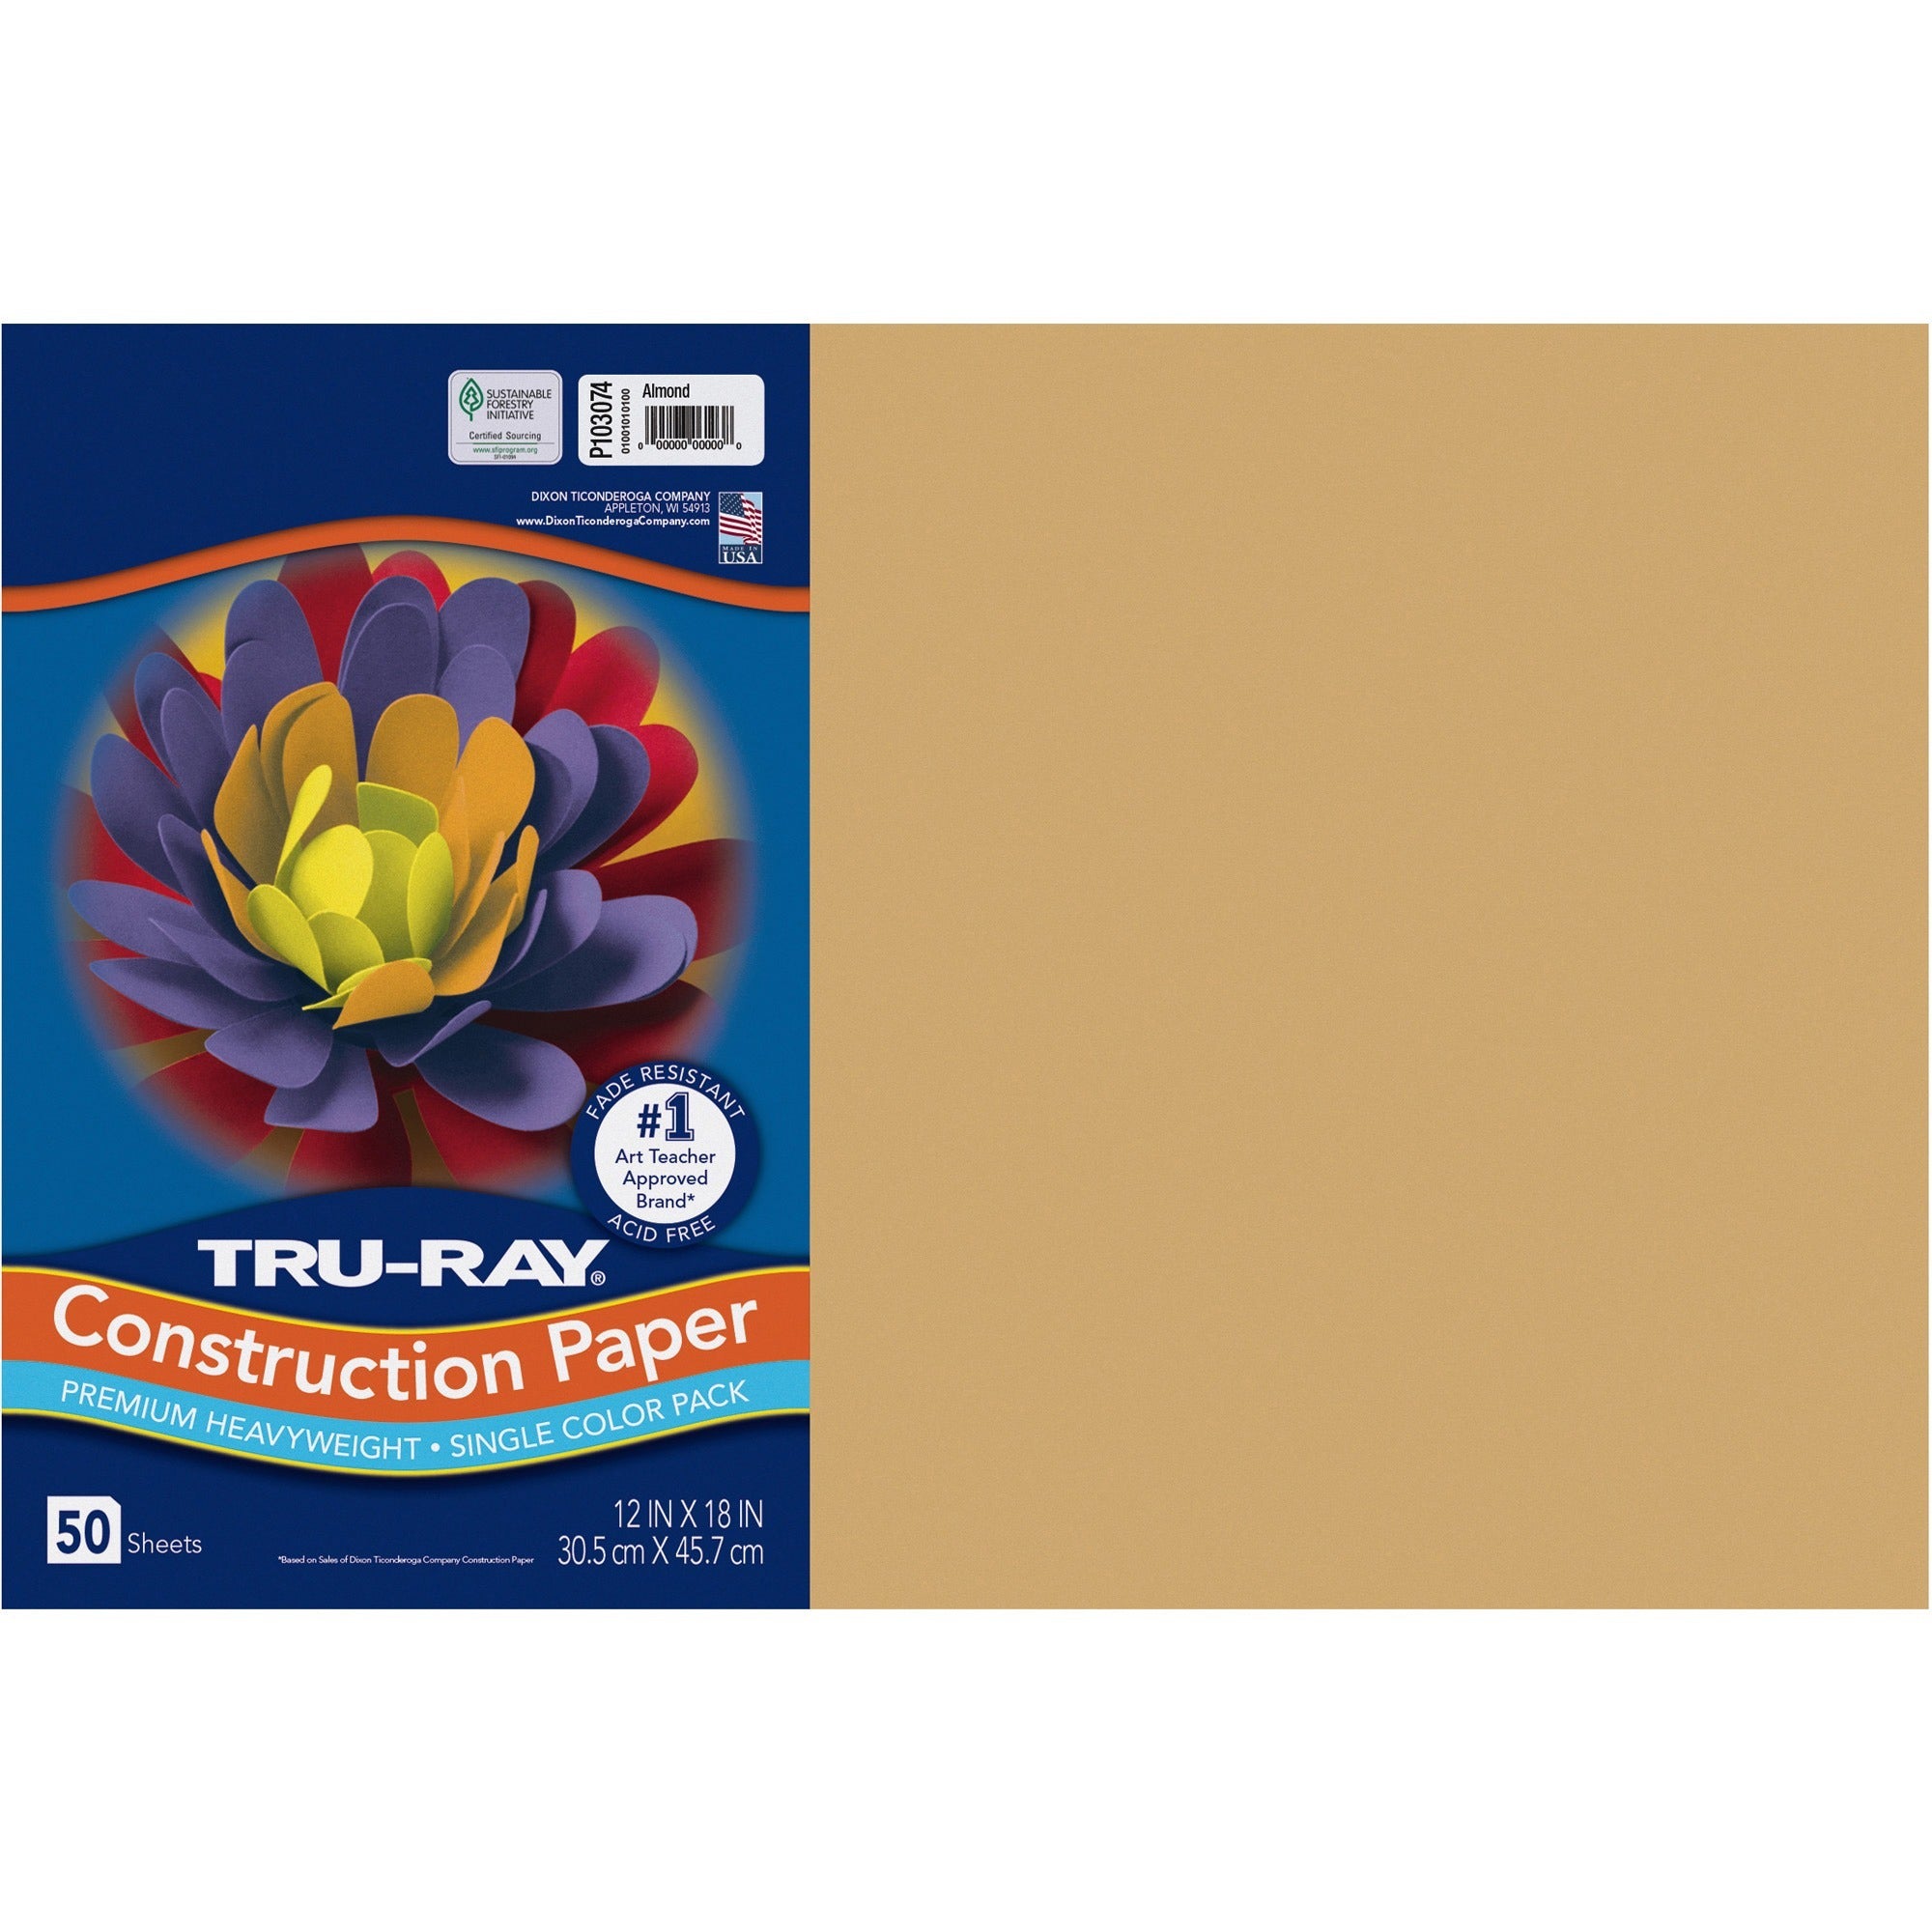 tru-ray-construction-paper-art-project-craft-project-12width-x-18length-76-lb-basis-weight-50-pack-almond-fiber-sulphite_pacp103074 - 1